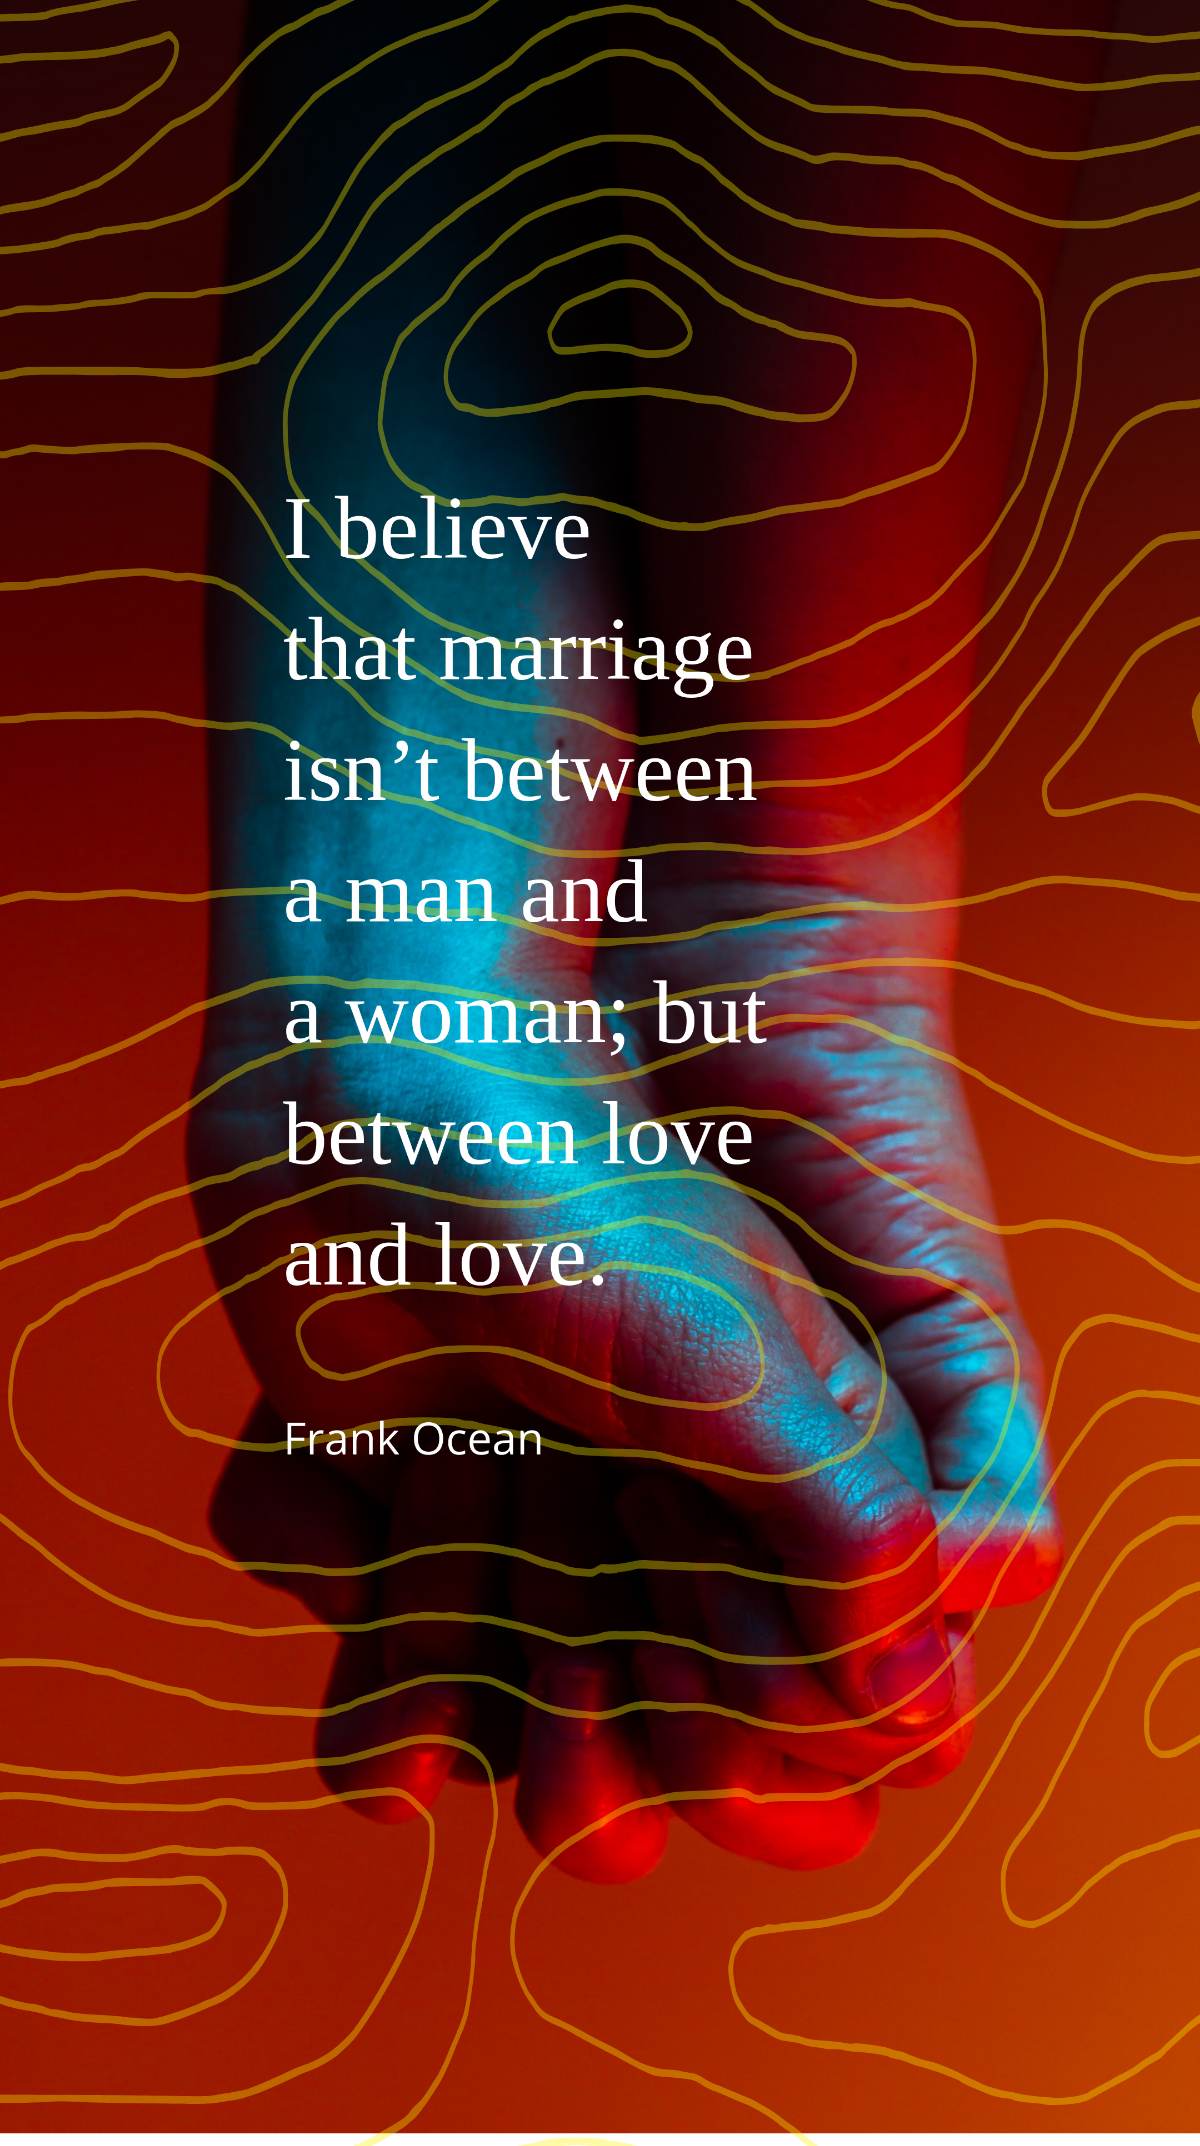 Frank Ocean - I believe that marriage isn’t between a man and a woman; but between love and love. Template